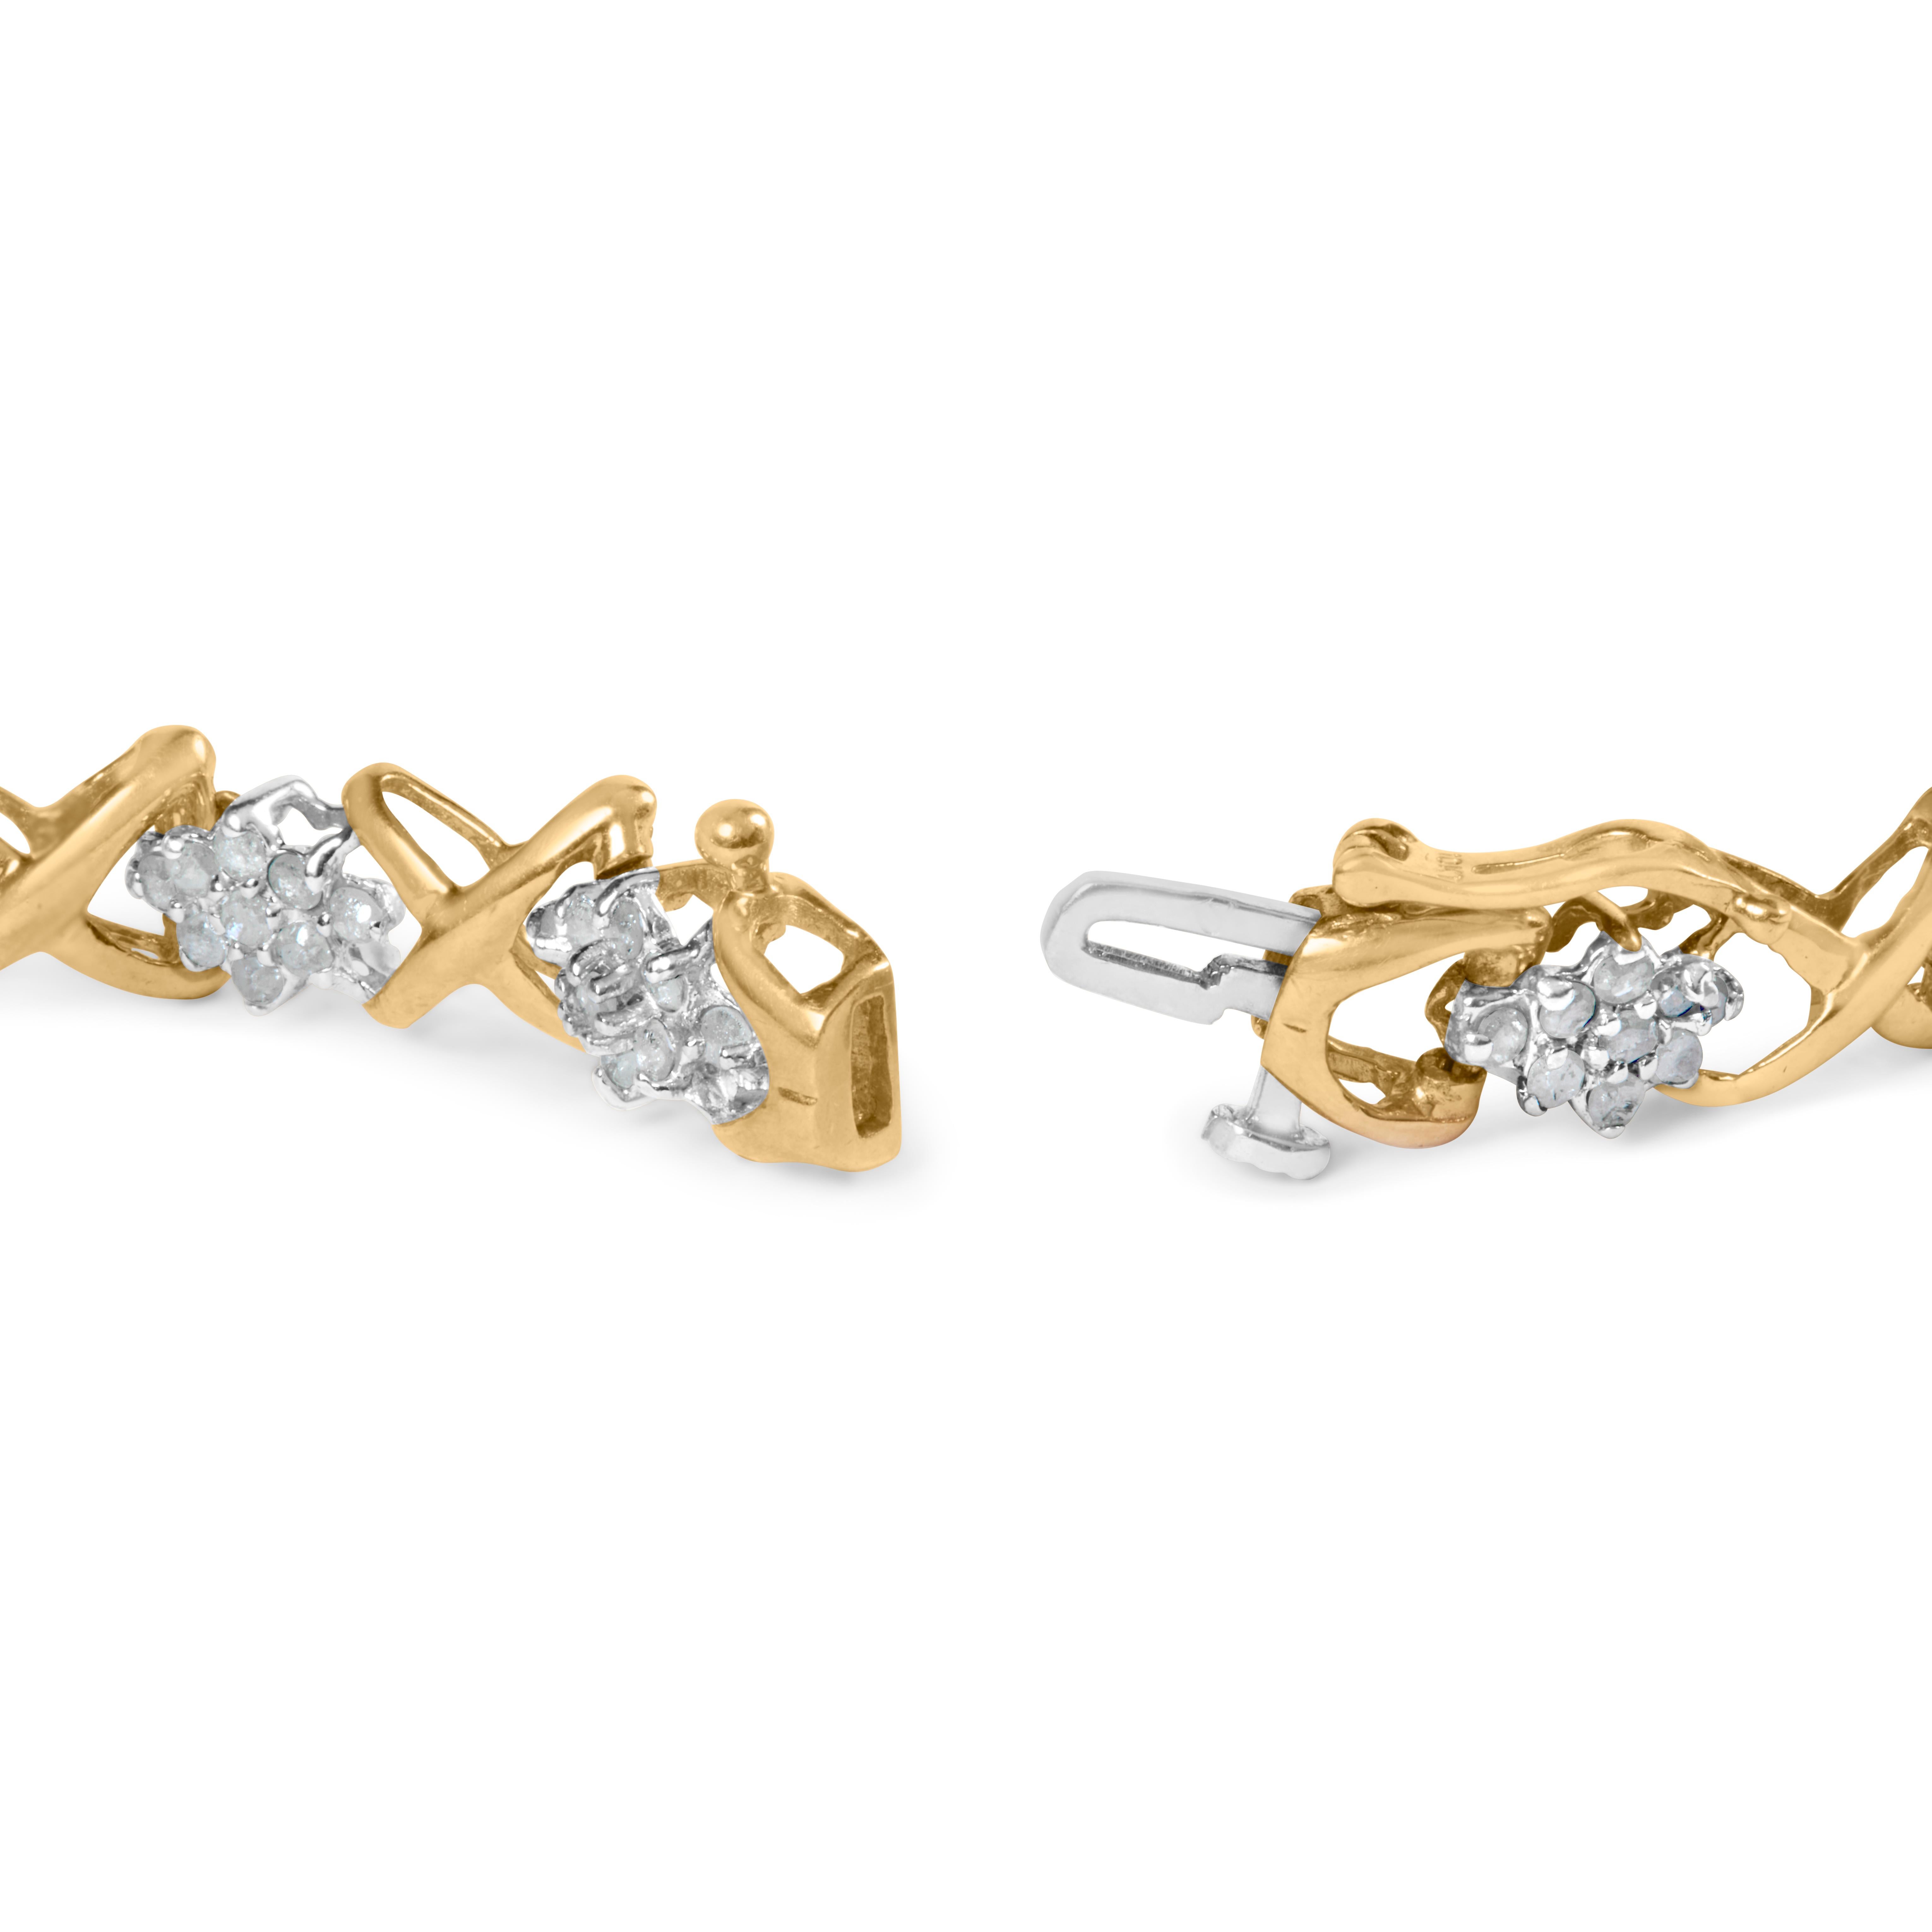 Indulge in the ultimate luxury with this stunning diamond cluster and alternating 